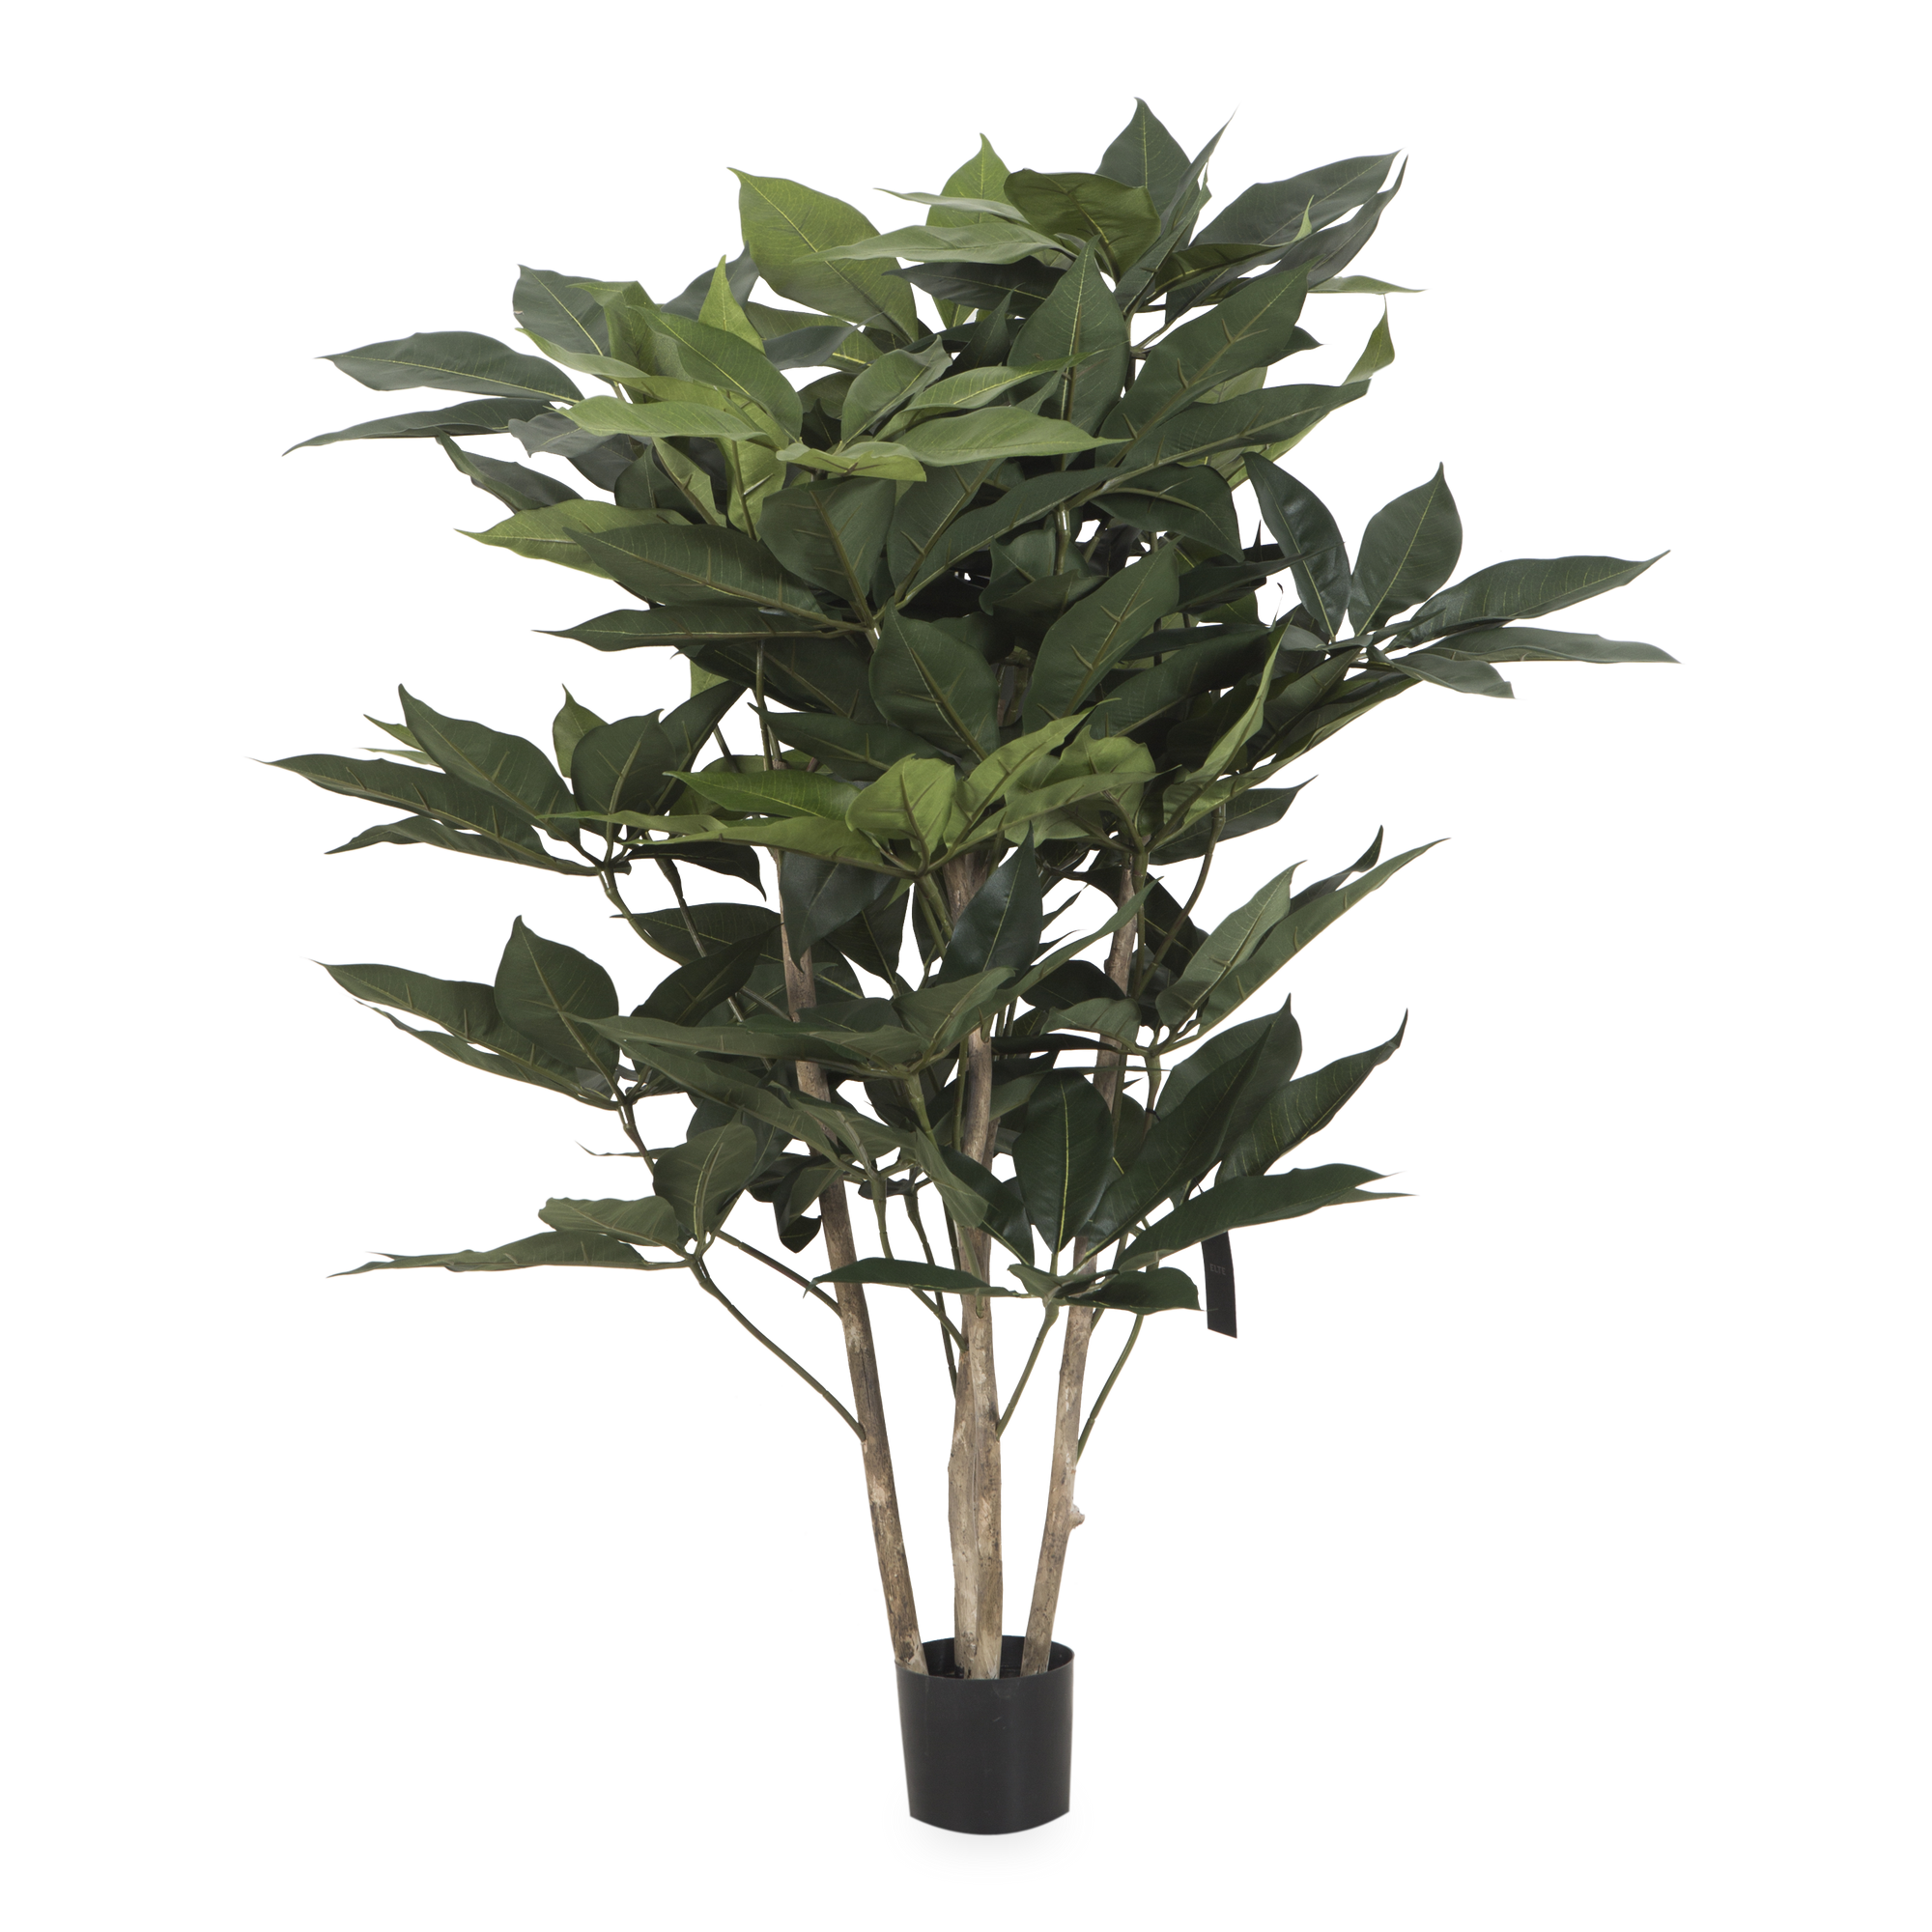 Stunningly beautiful, this Schefflera Tree was created with high-quality materials to replicate the real tree.